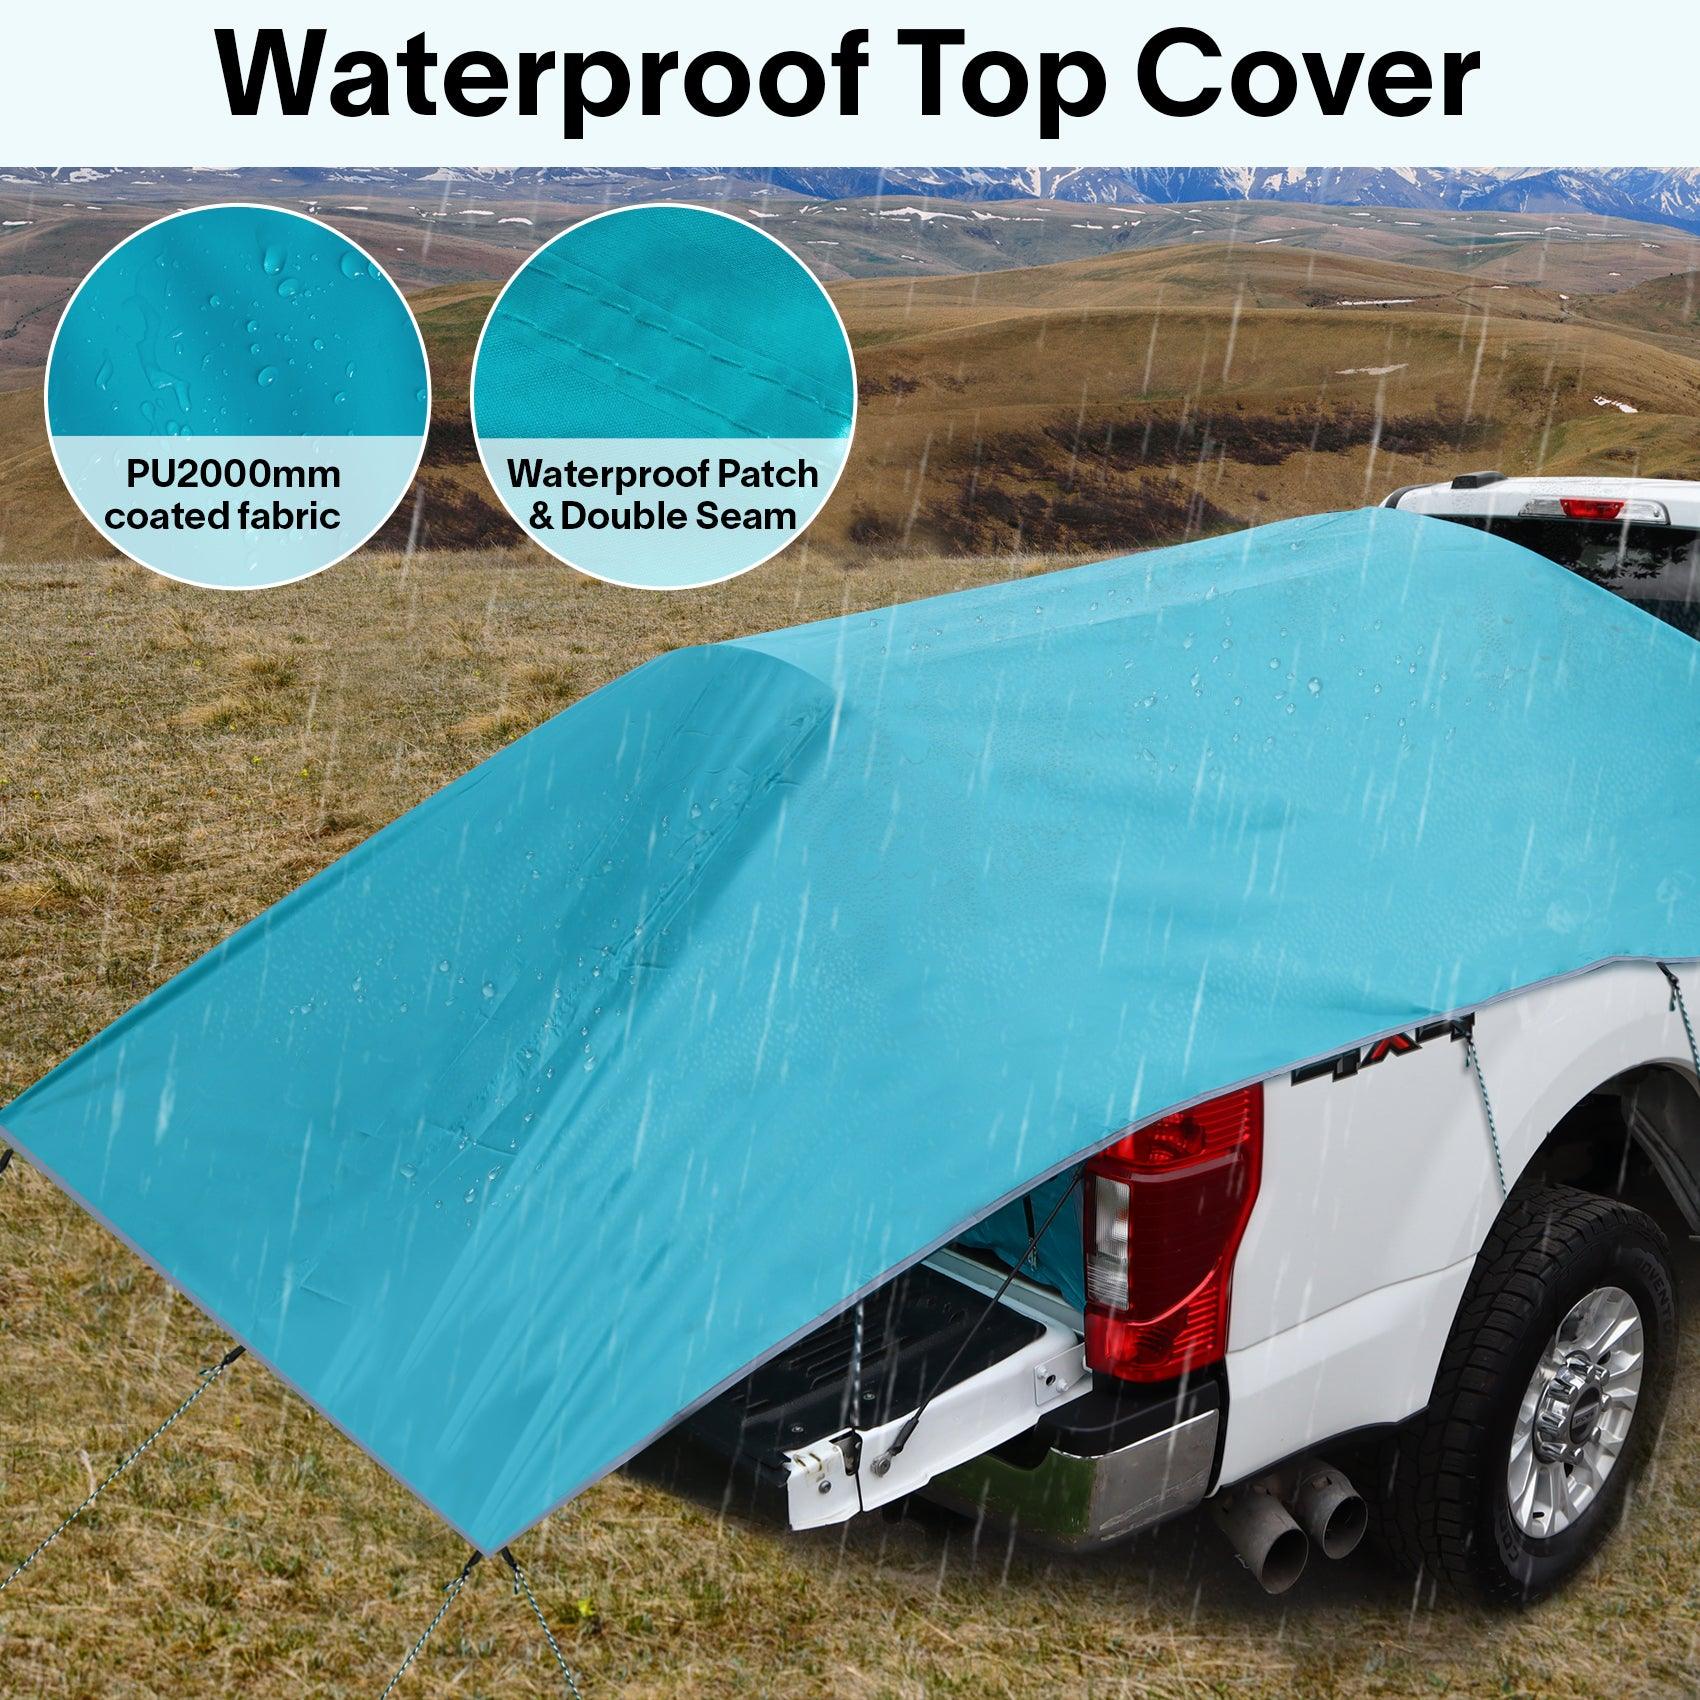 Waterproof at the top of Truck Tent